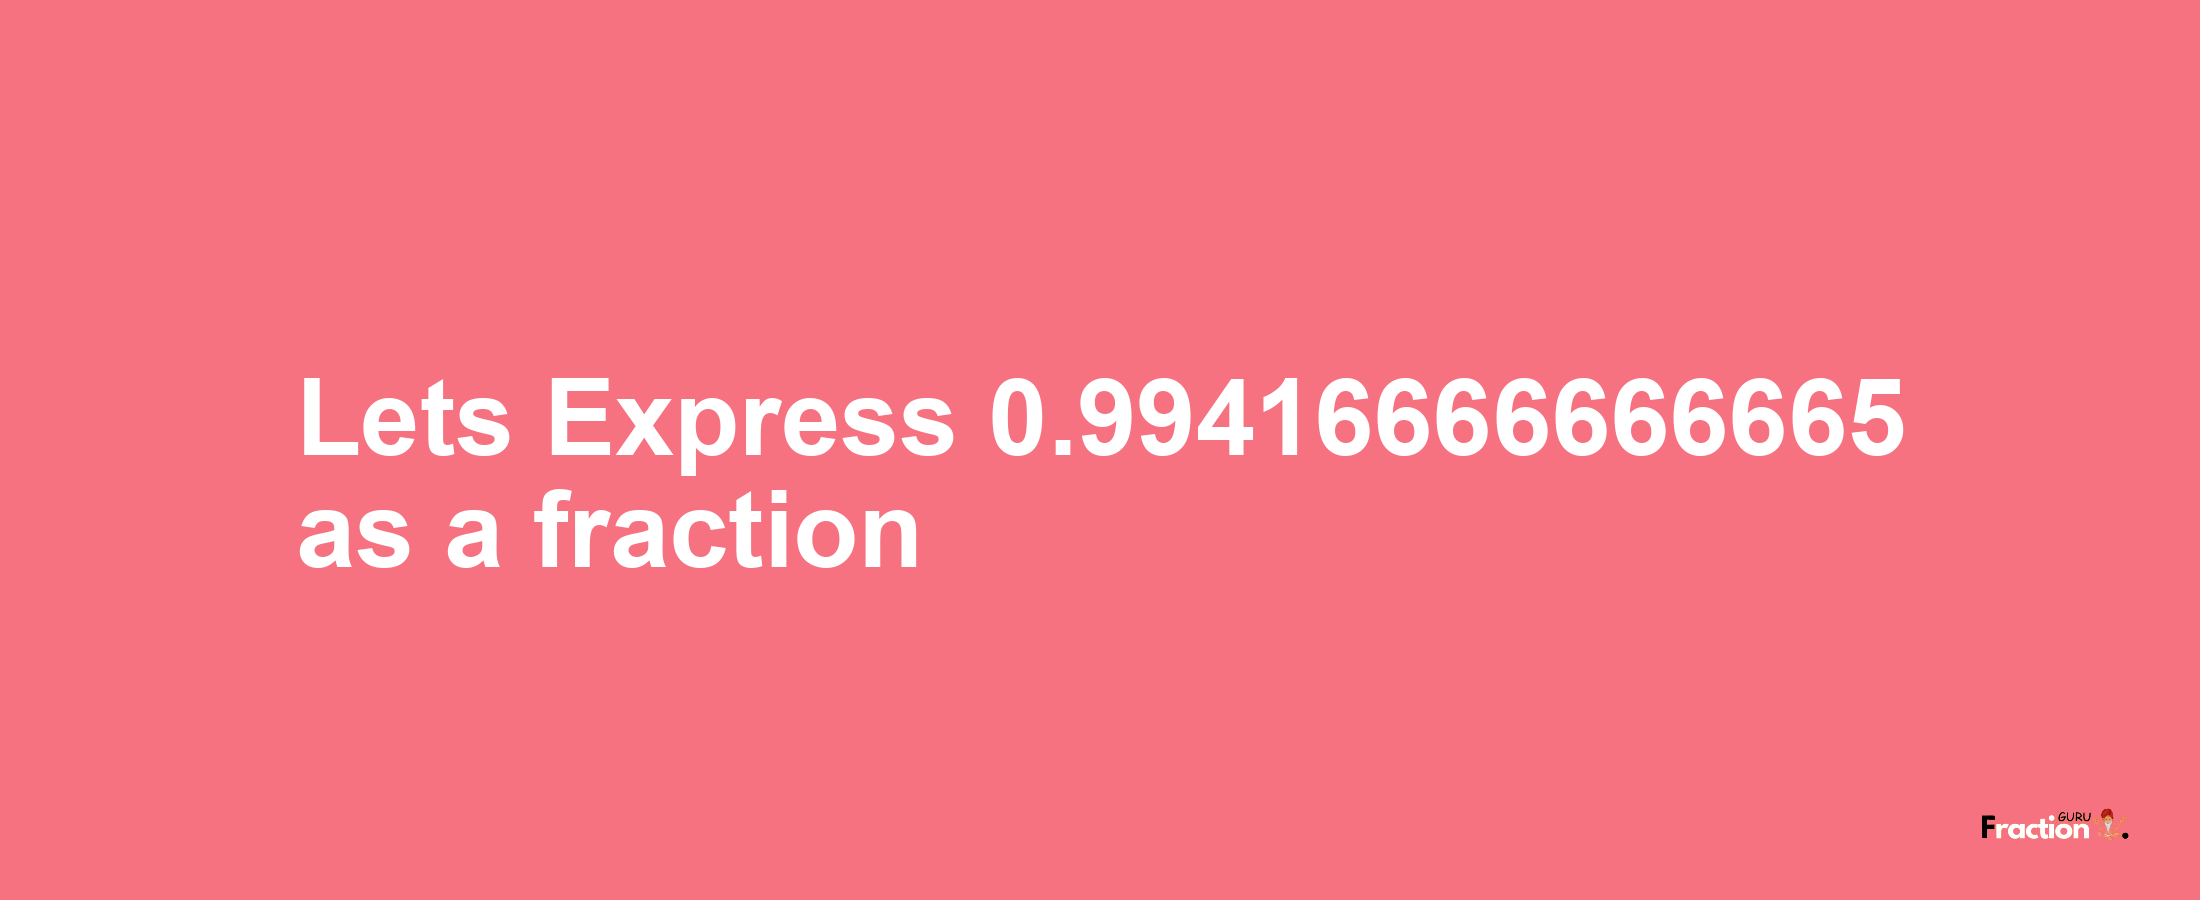 Lets Express 0.99416666666665 as afraction